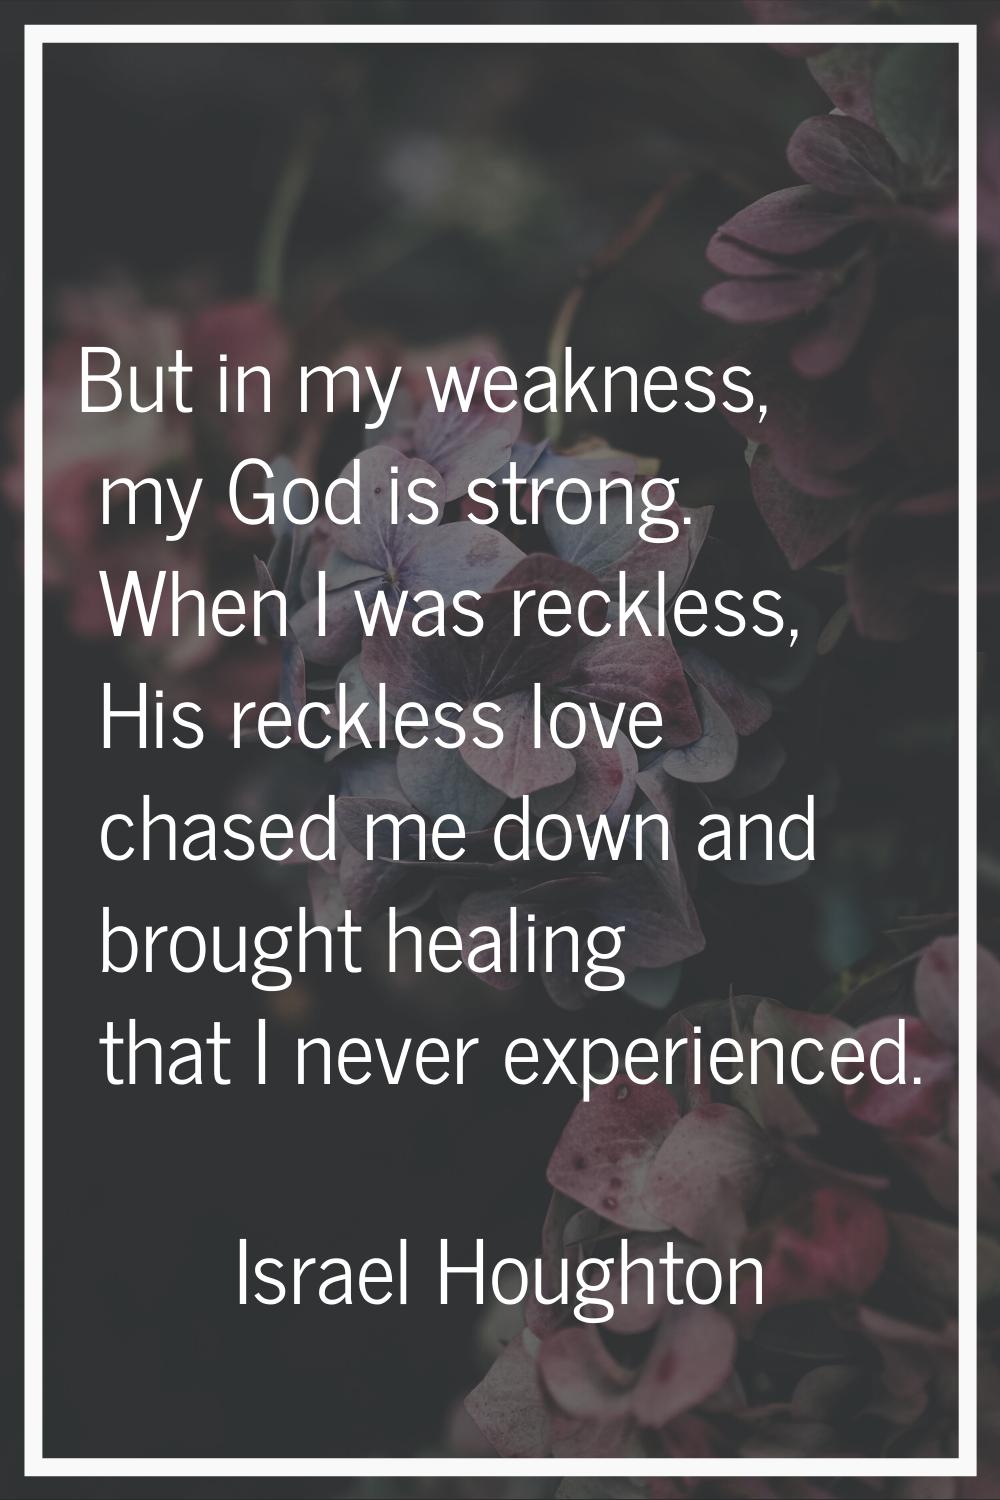 But in my weakness, my God is strong. When I was reckless, His reckless love chased me down and bro